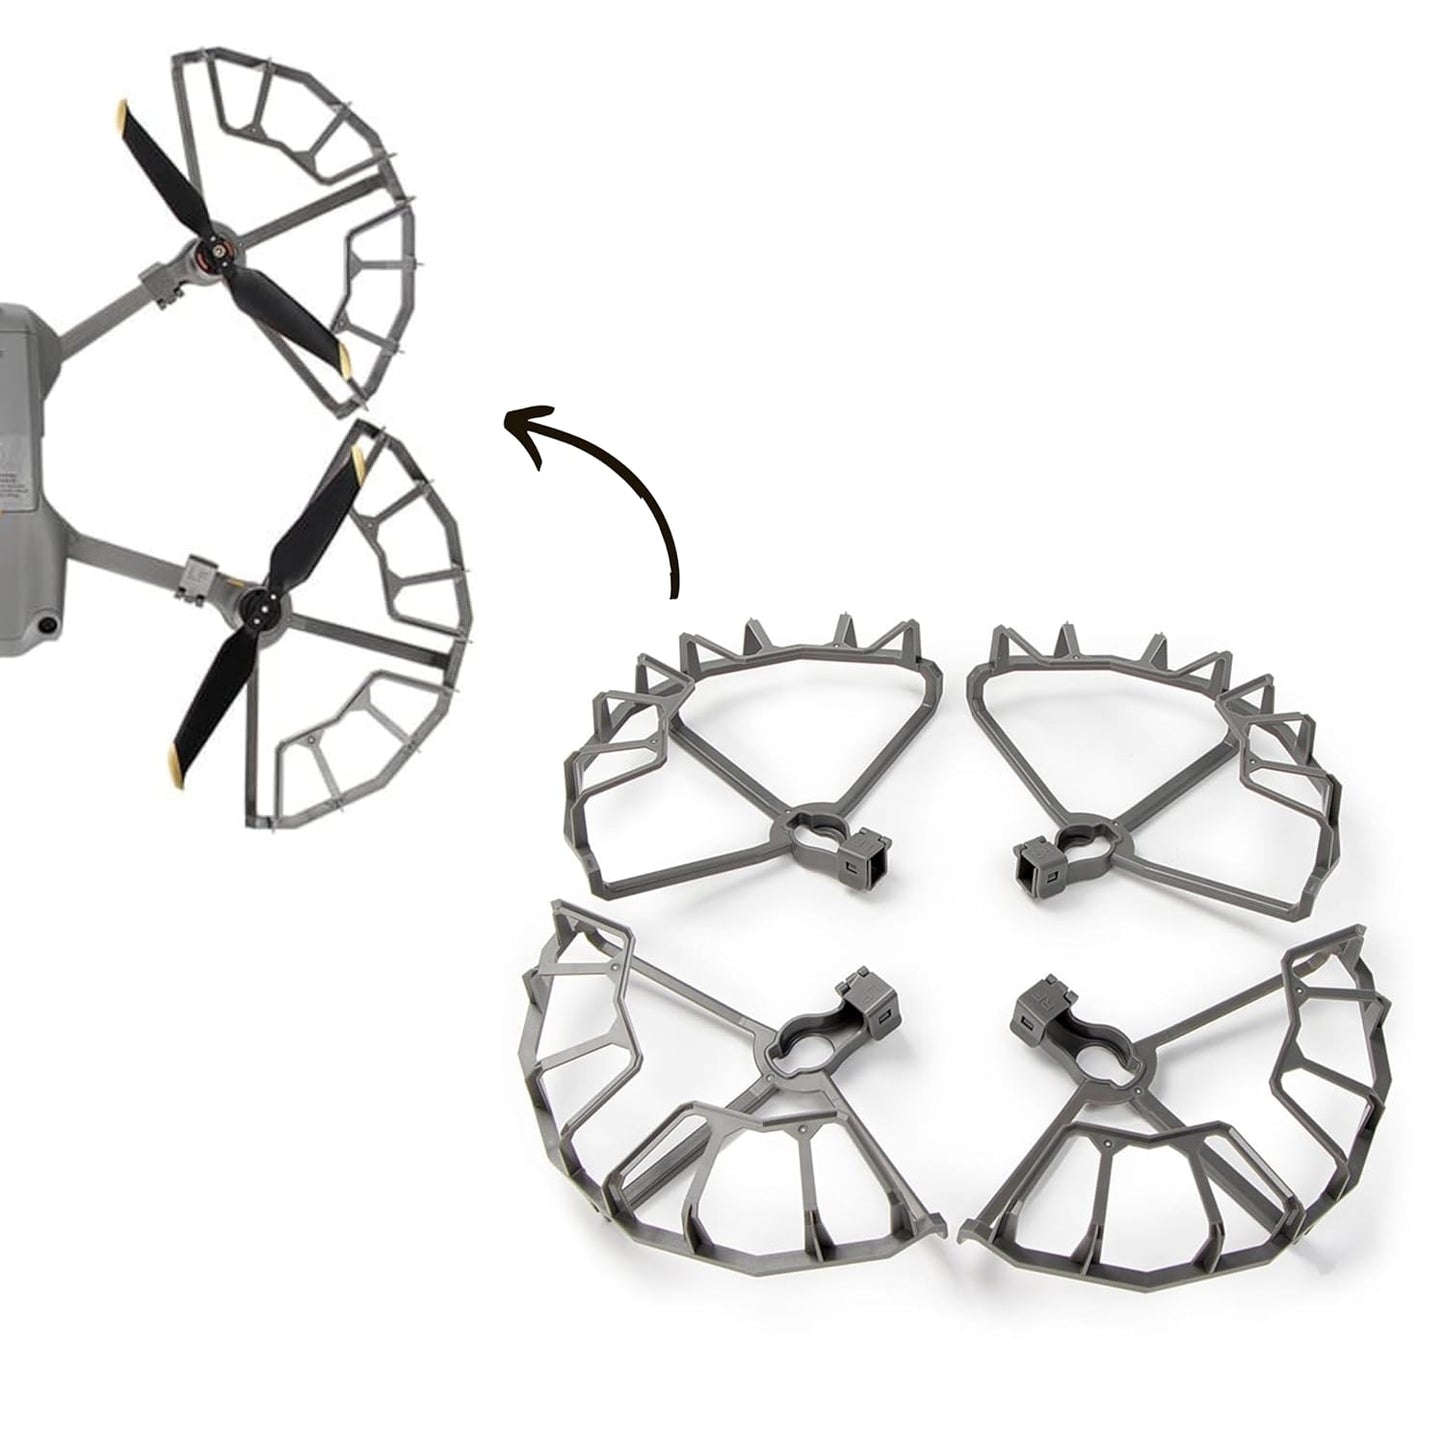 Propellers Guard For Dji Mavic Air 2/ Air 2s 360 degree Semi Enclosed Propeller Protector Guard Safety Accessories